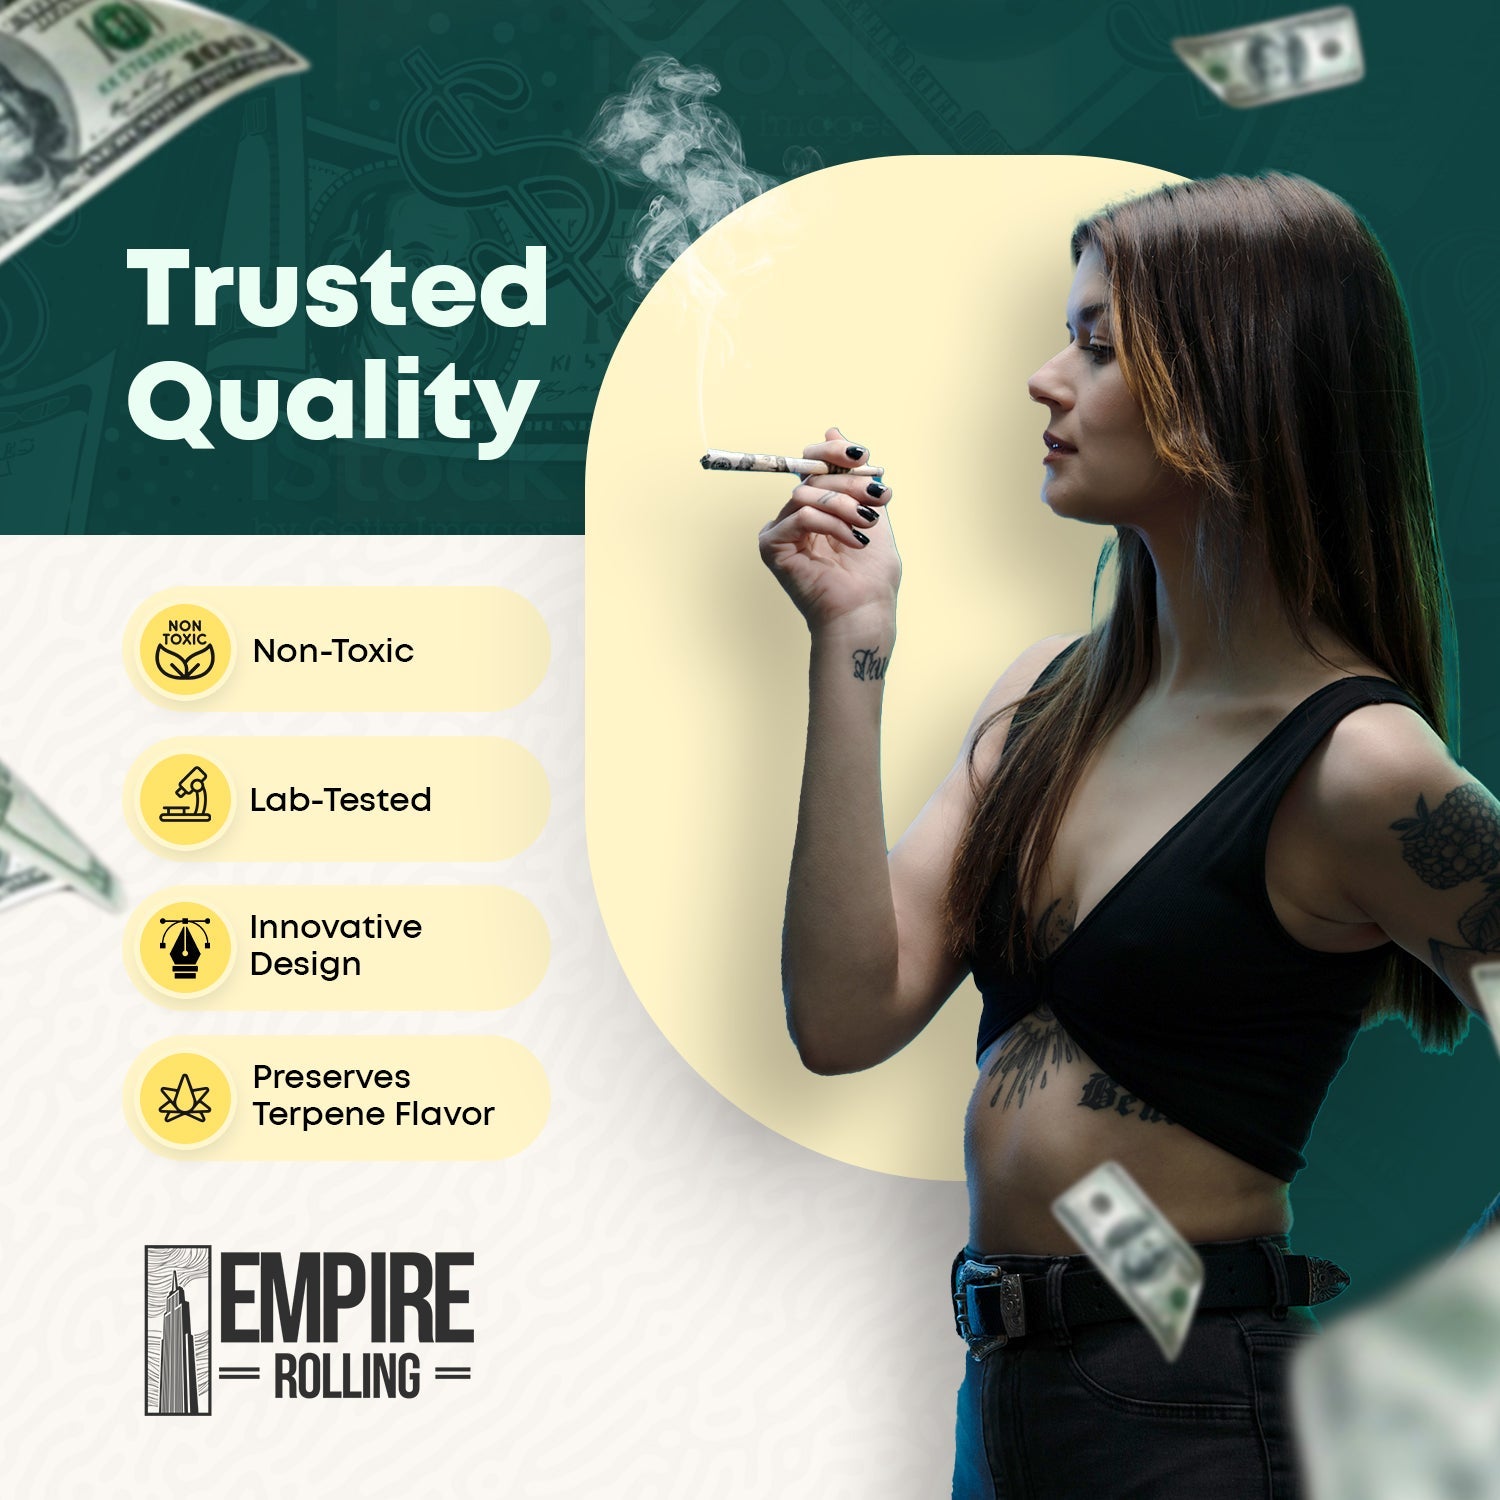 Empire Rolling's King Size Organic Hemp Rolling Papers, eco-friendly and crafted with high-quality, natural materials for a premium smoking experience.BENNY OG Cones - Empire Rolling Papers